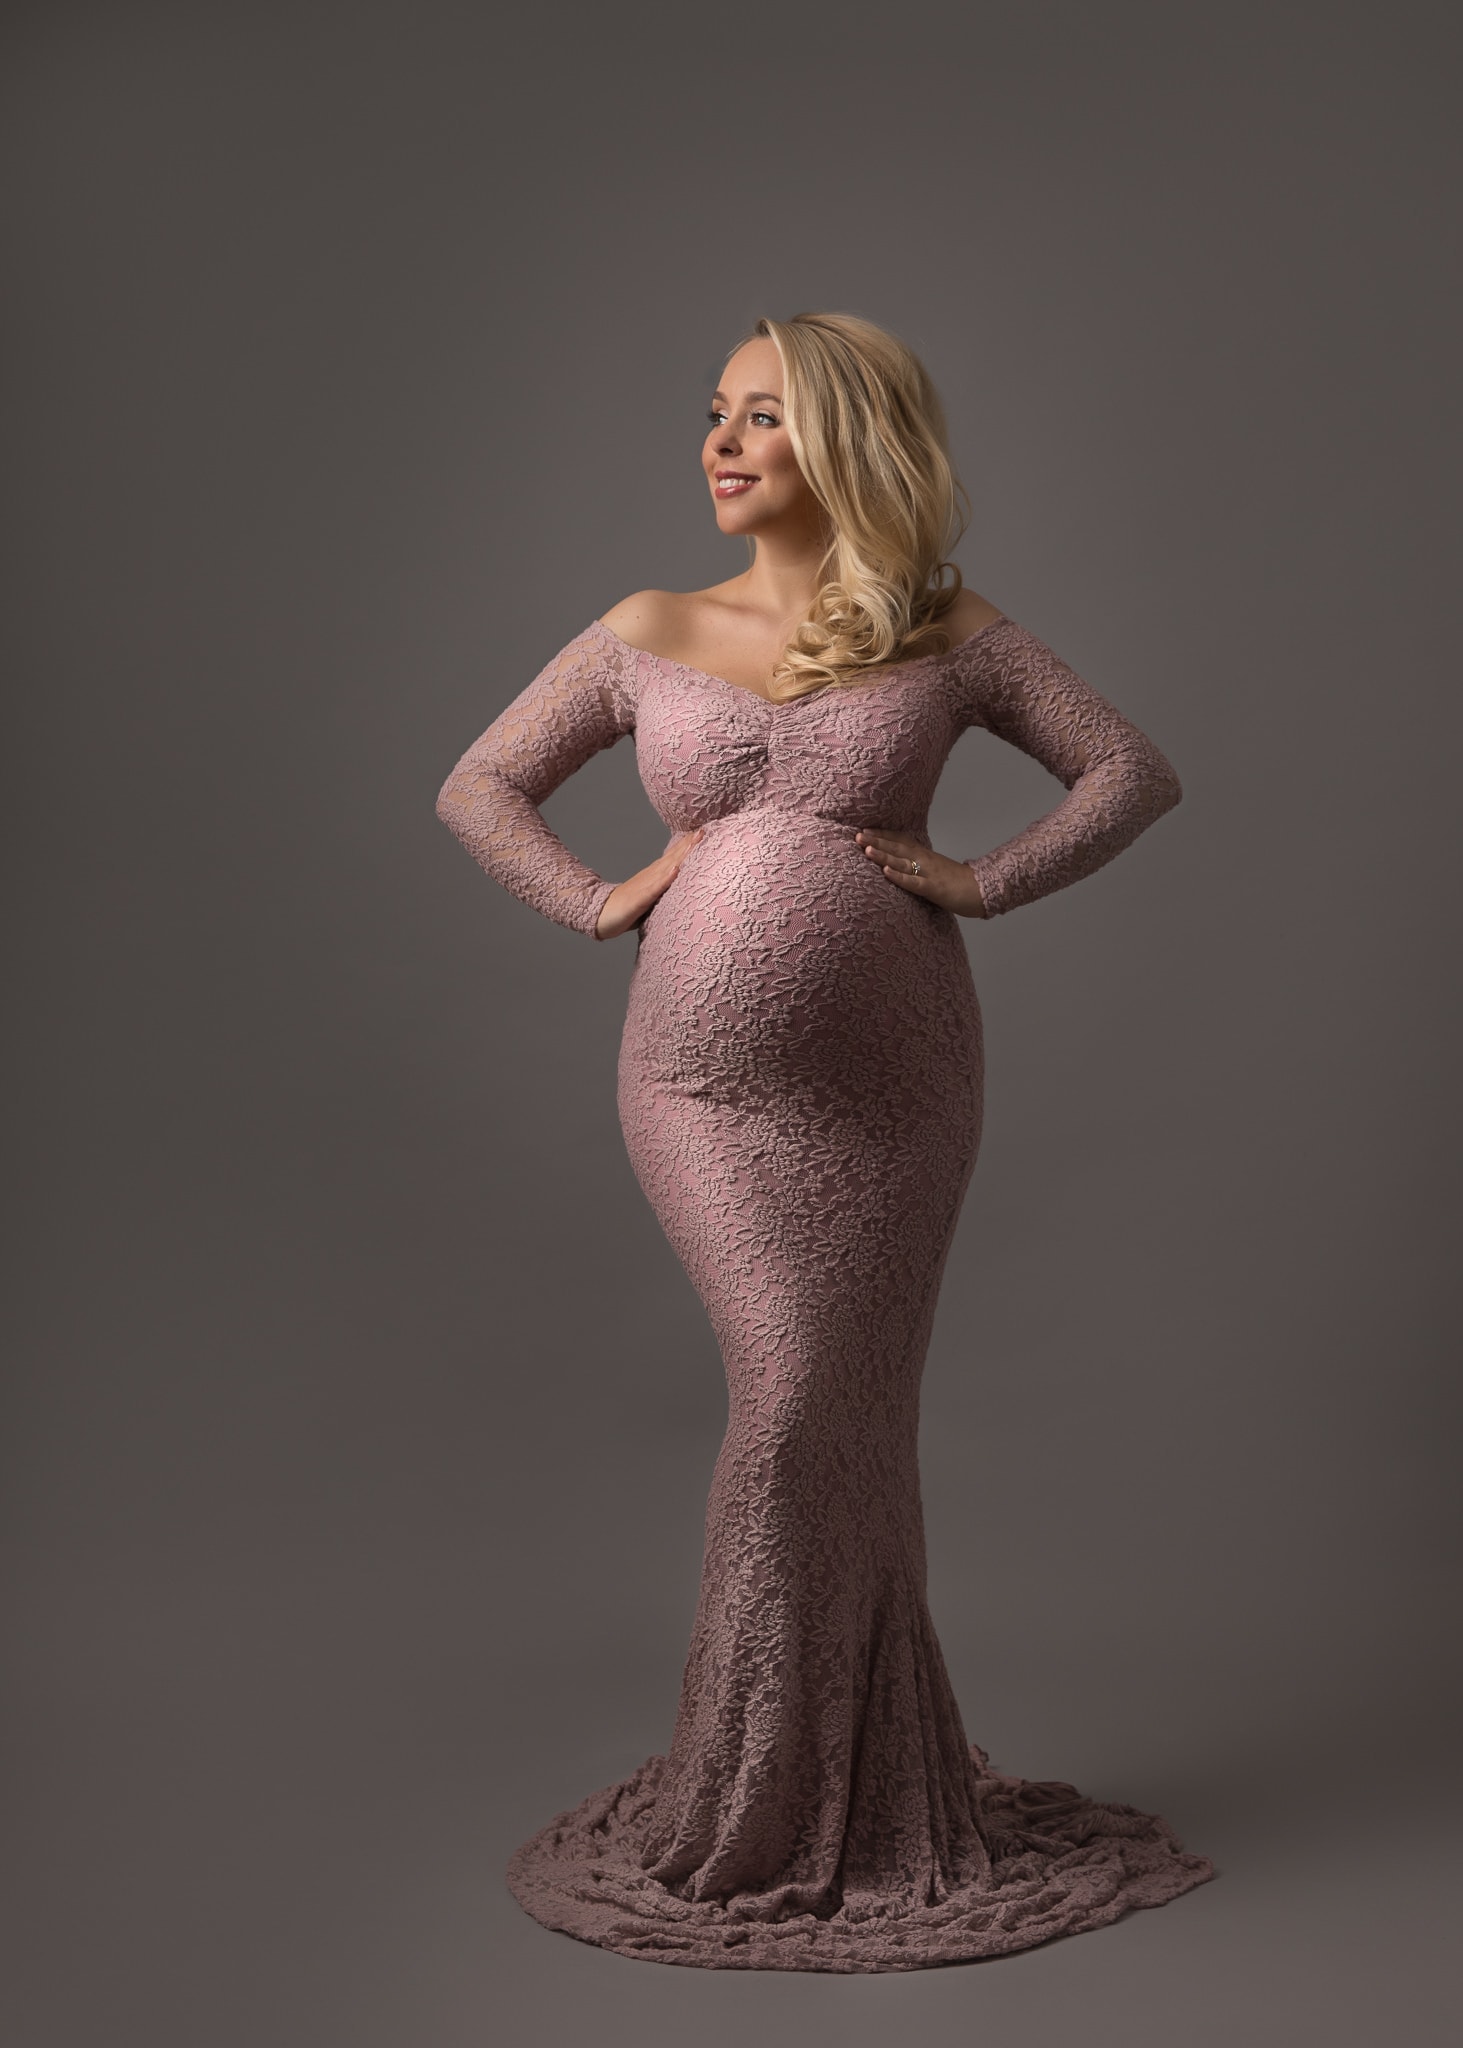 Pregnant Lady in long pink dress